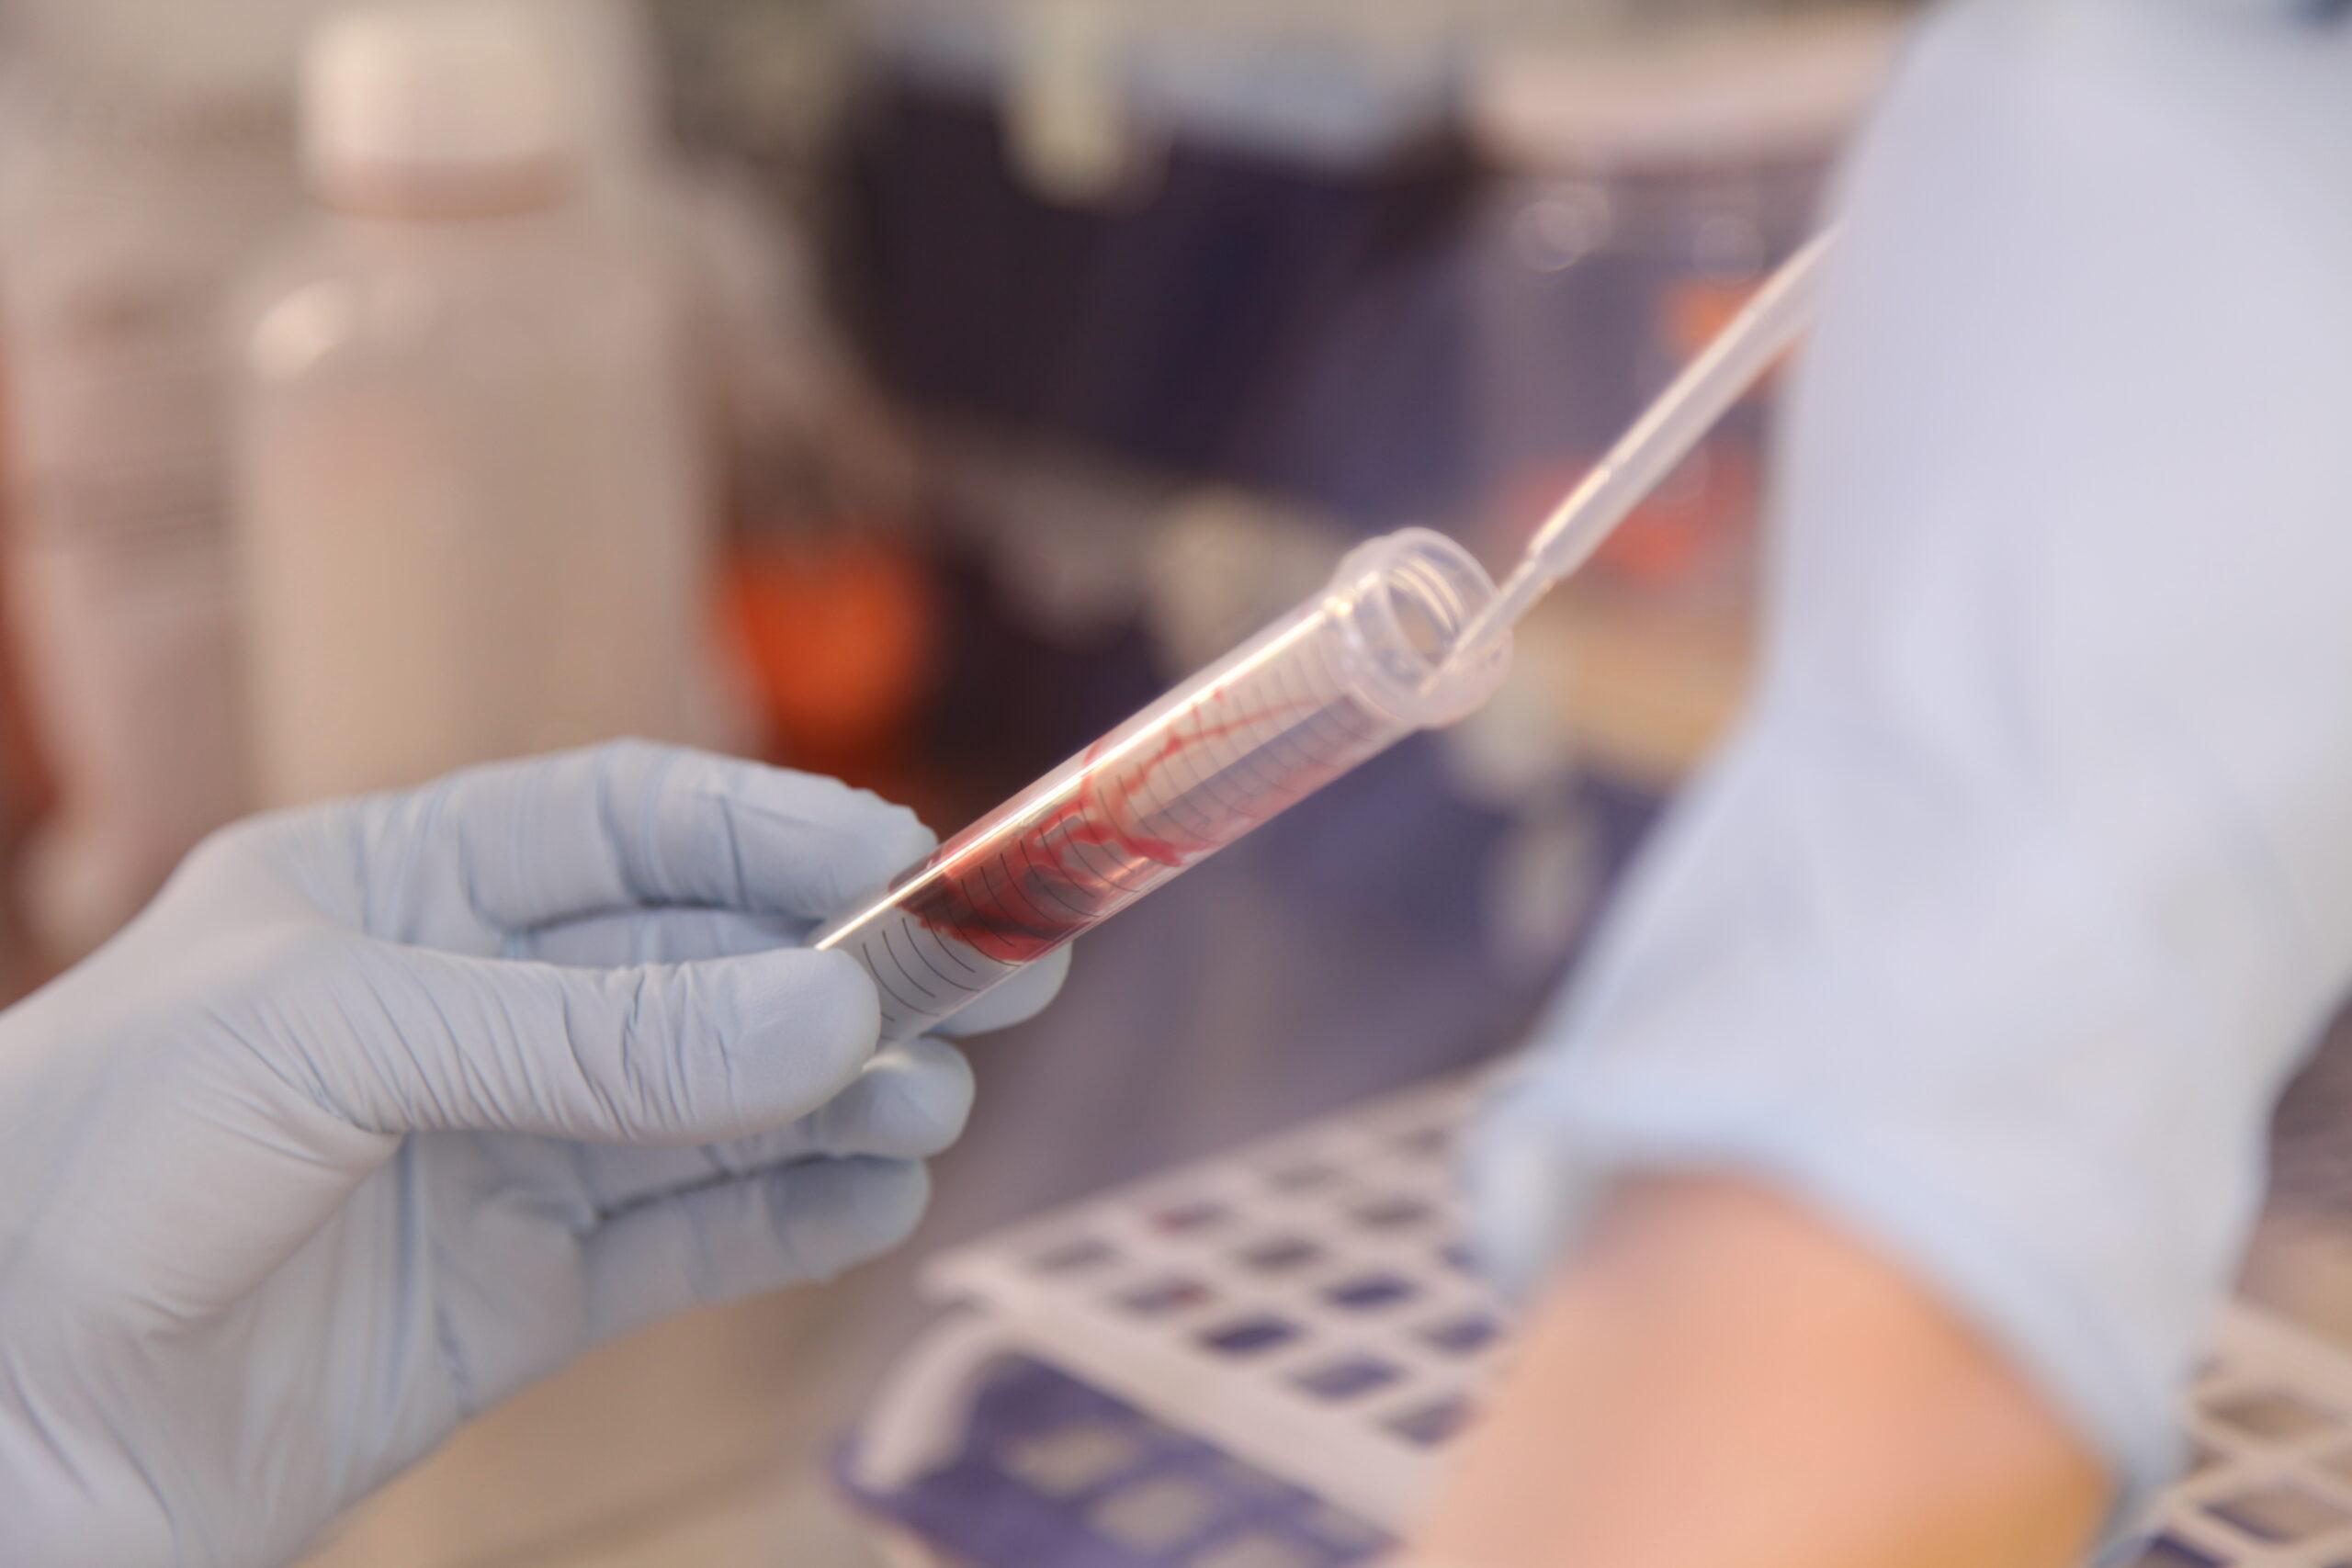 Researcher in the laboratory working with a blood sample in a test tube.